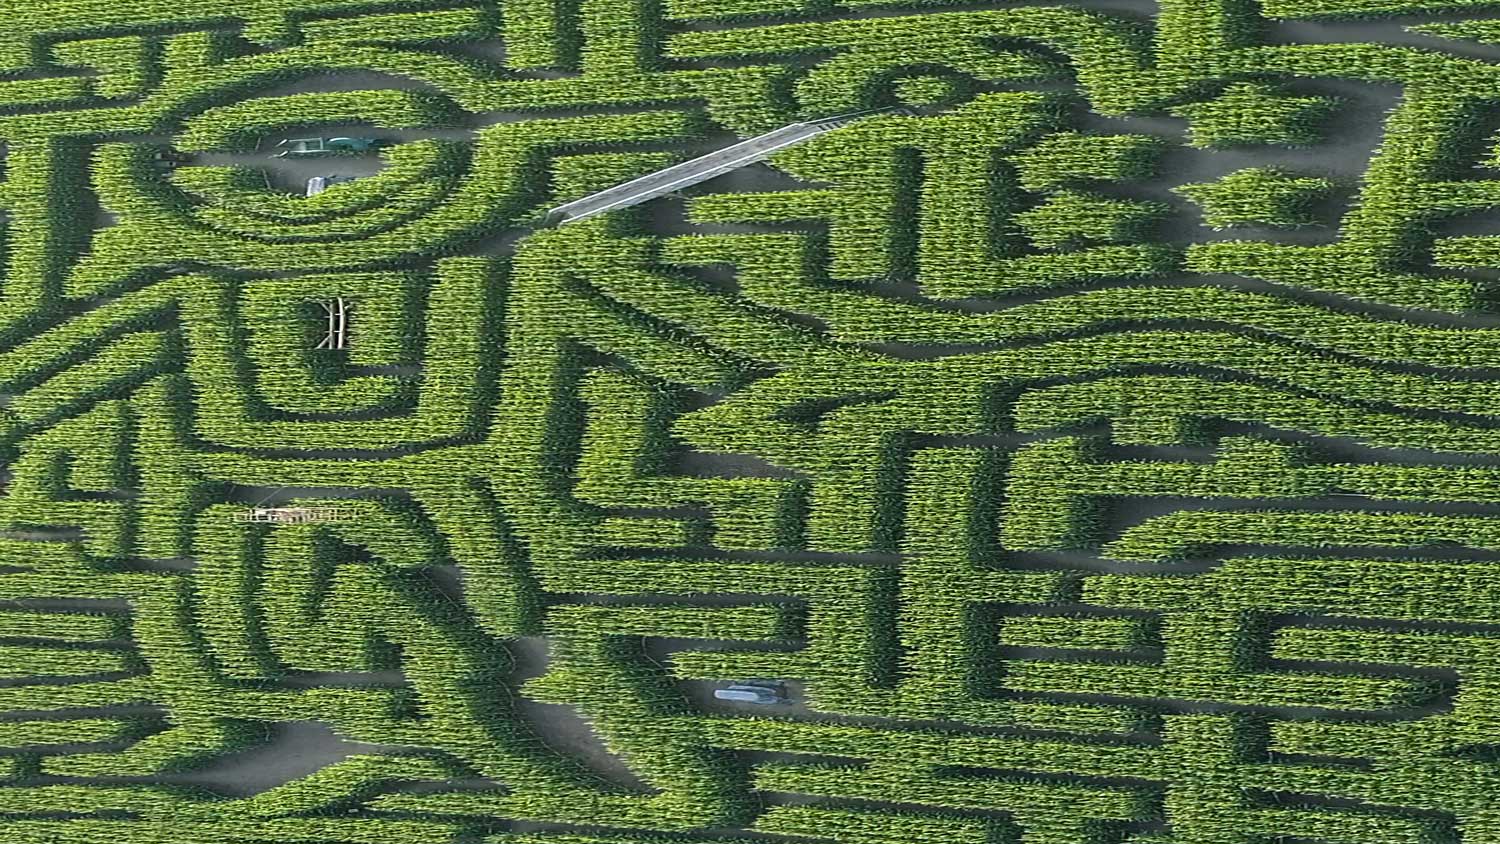 Corn maze from above.